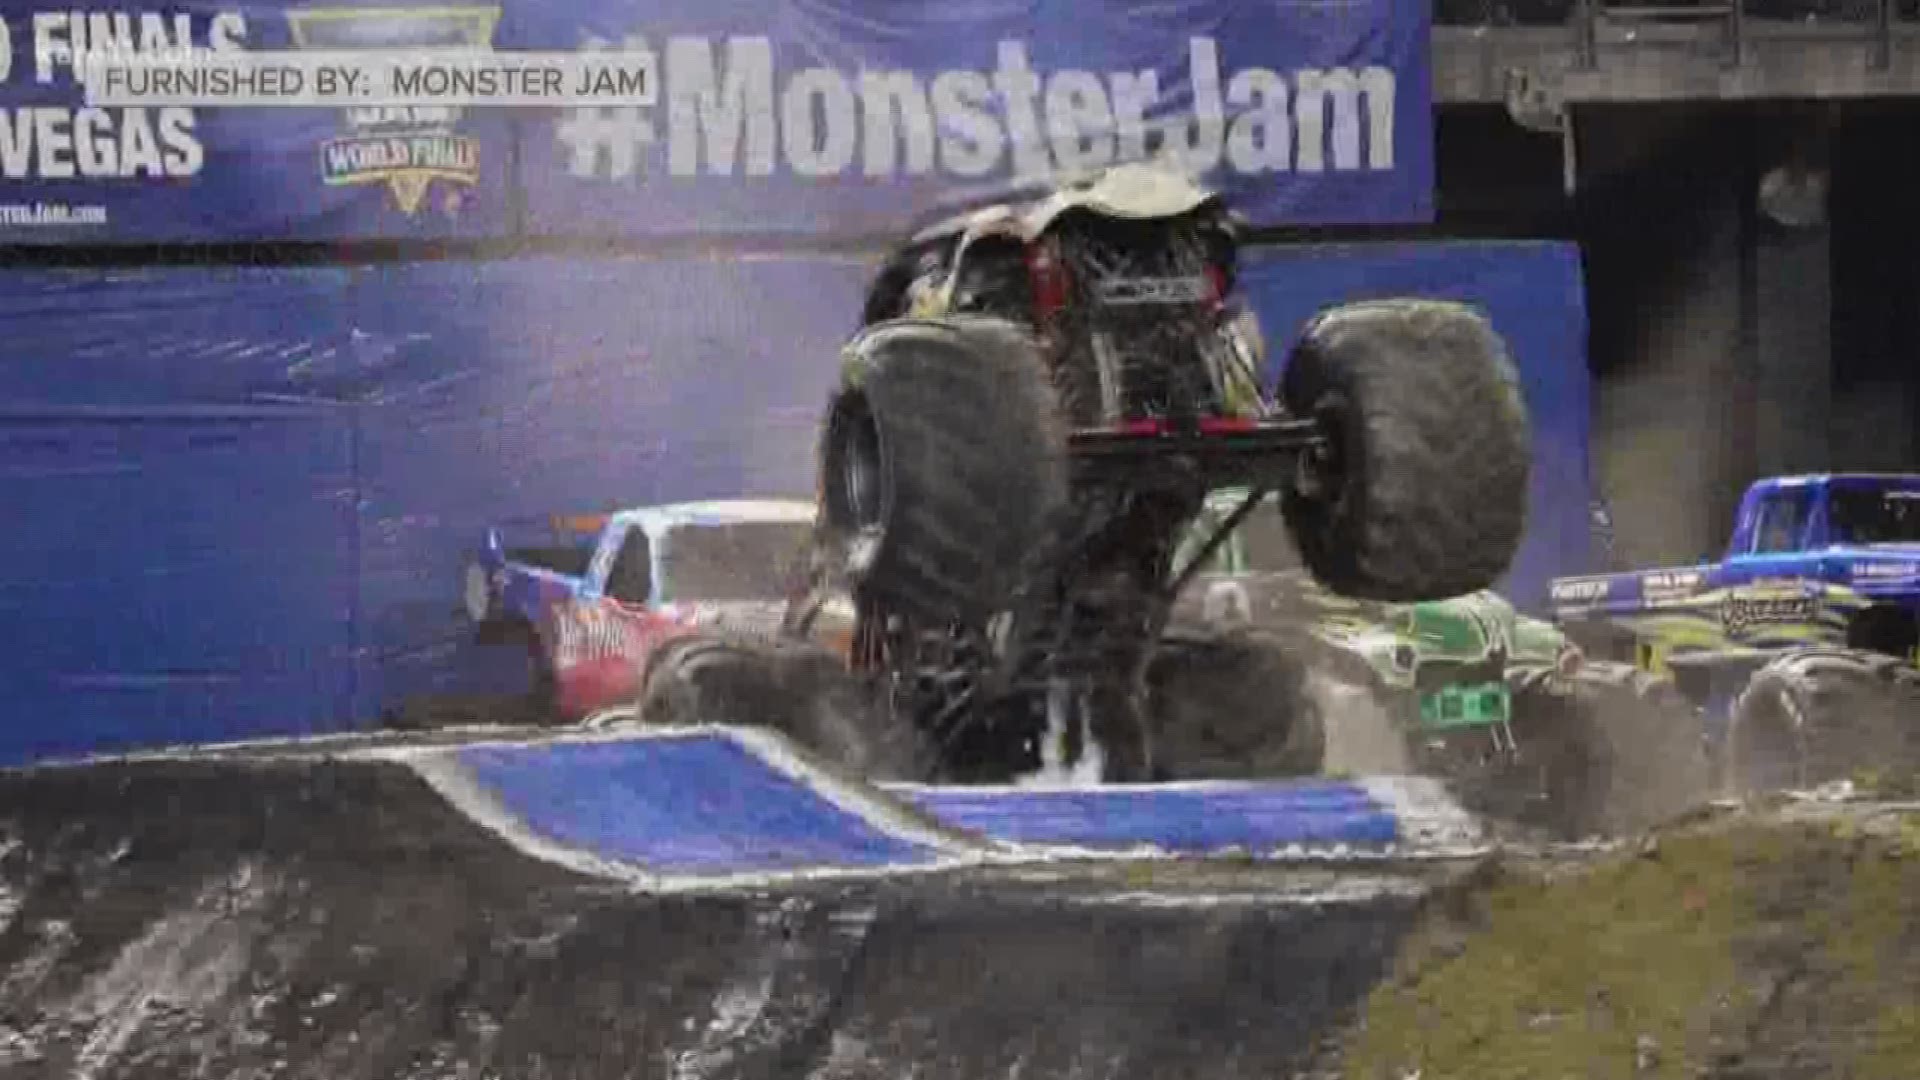 Monster Jam drivers are trained, world-class male and female athletes who have mastered not only the physical strength and mental stamina needed to compete, but the vital dexterity to control 12,000-pound machines capable of doing backflips, vertical two-wheel skills and racing at speeds up to 70 miles per hour.